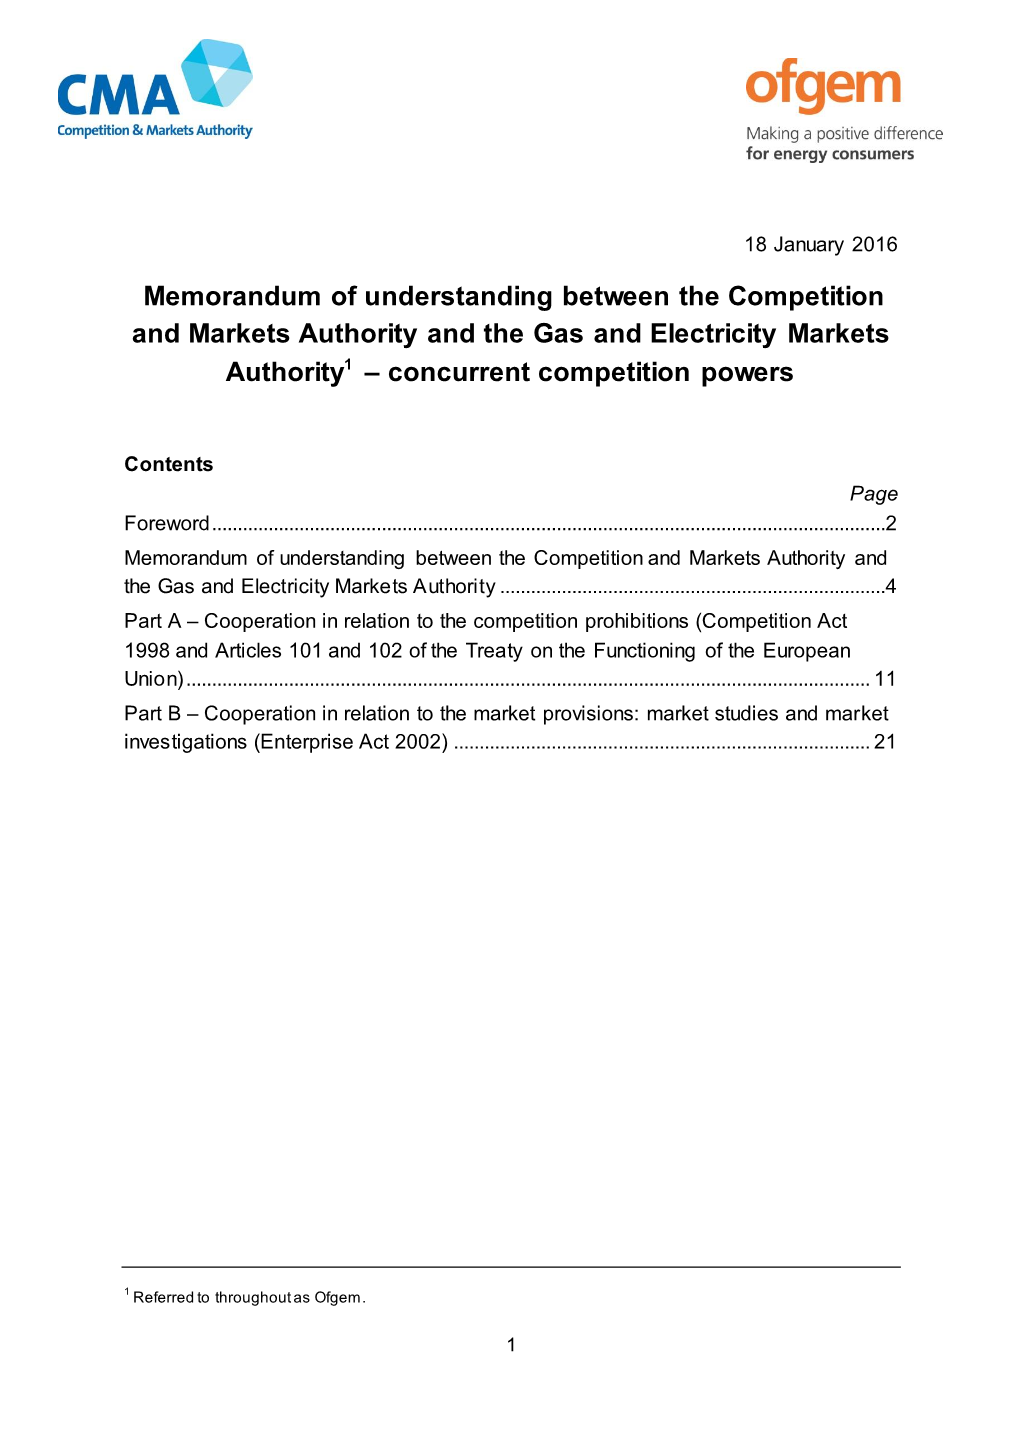 Memorandum of Understanding Between the Competition and Markets Authority and the Gas and Electricity Markets Authority1 – Concurrent Competition Powers